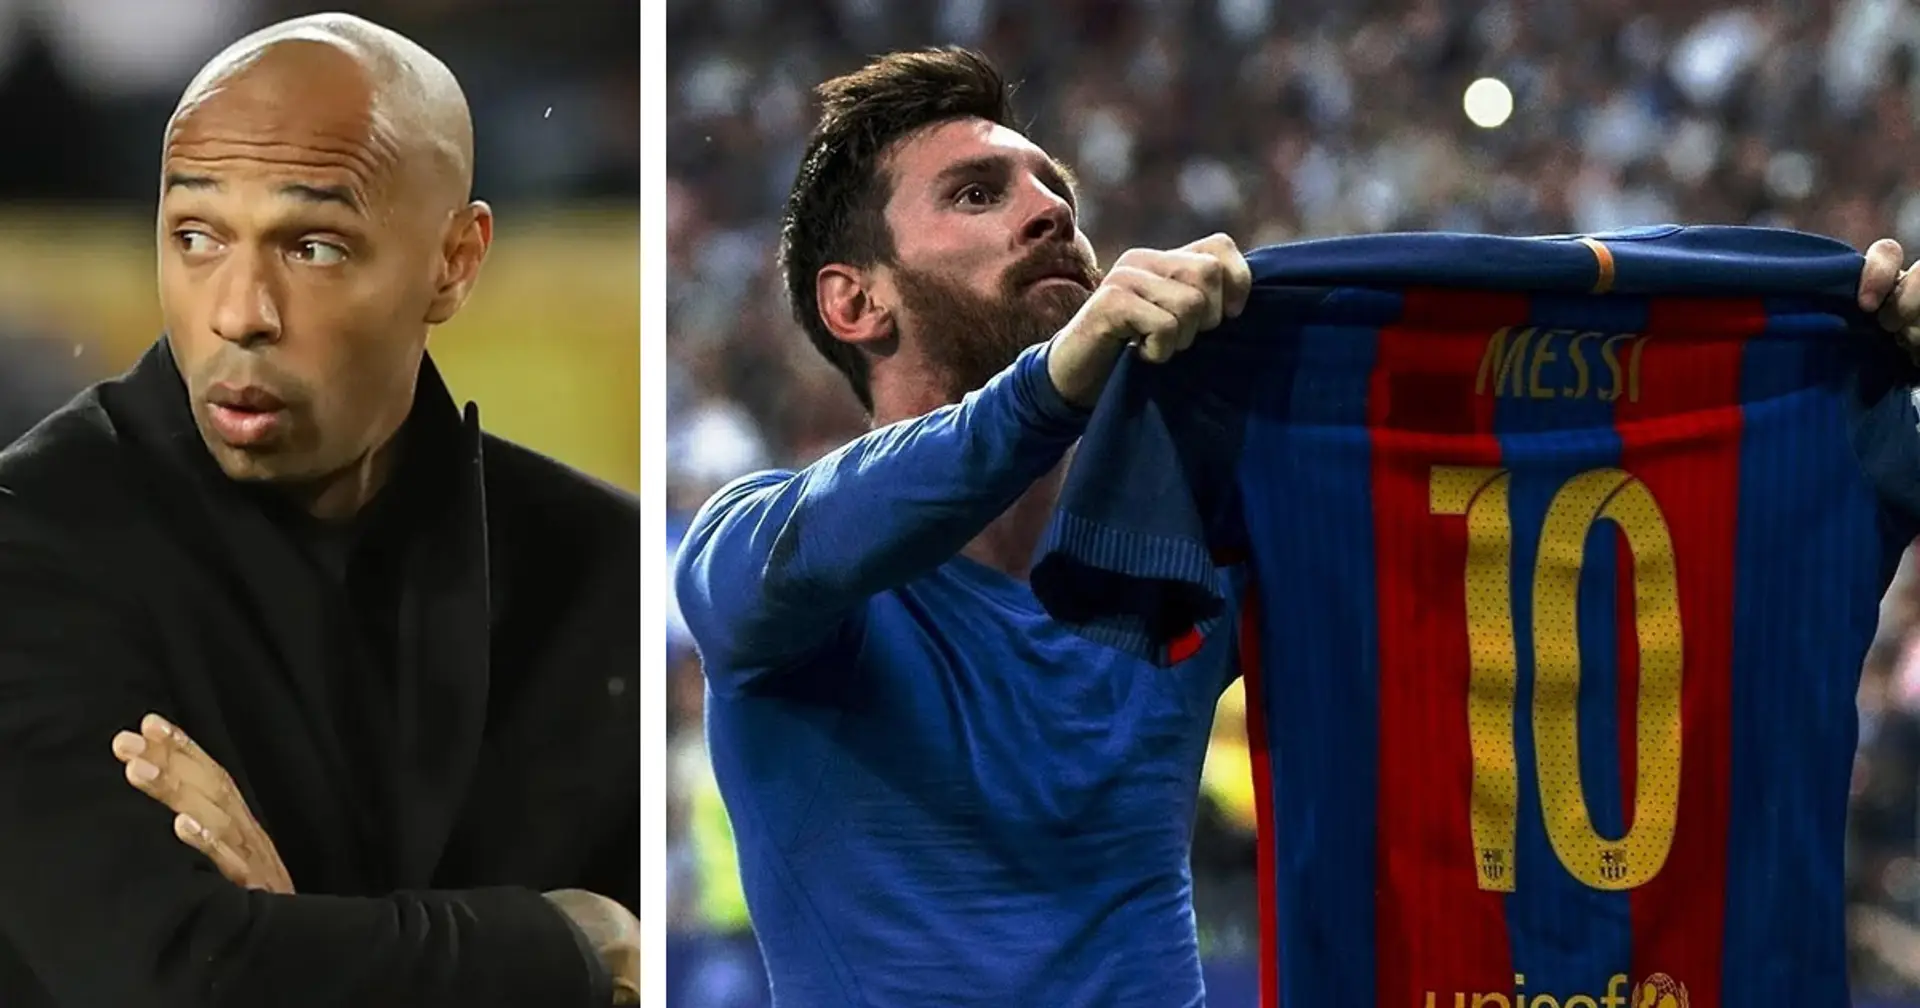 Thierry Henry said all that must be said to Leo Messi doubters in 2017